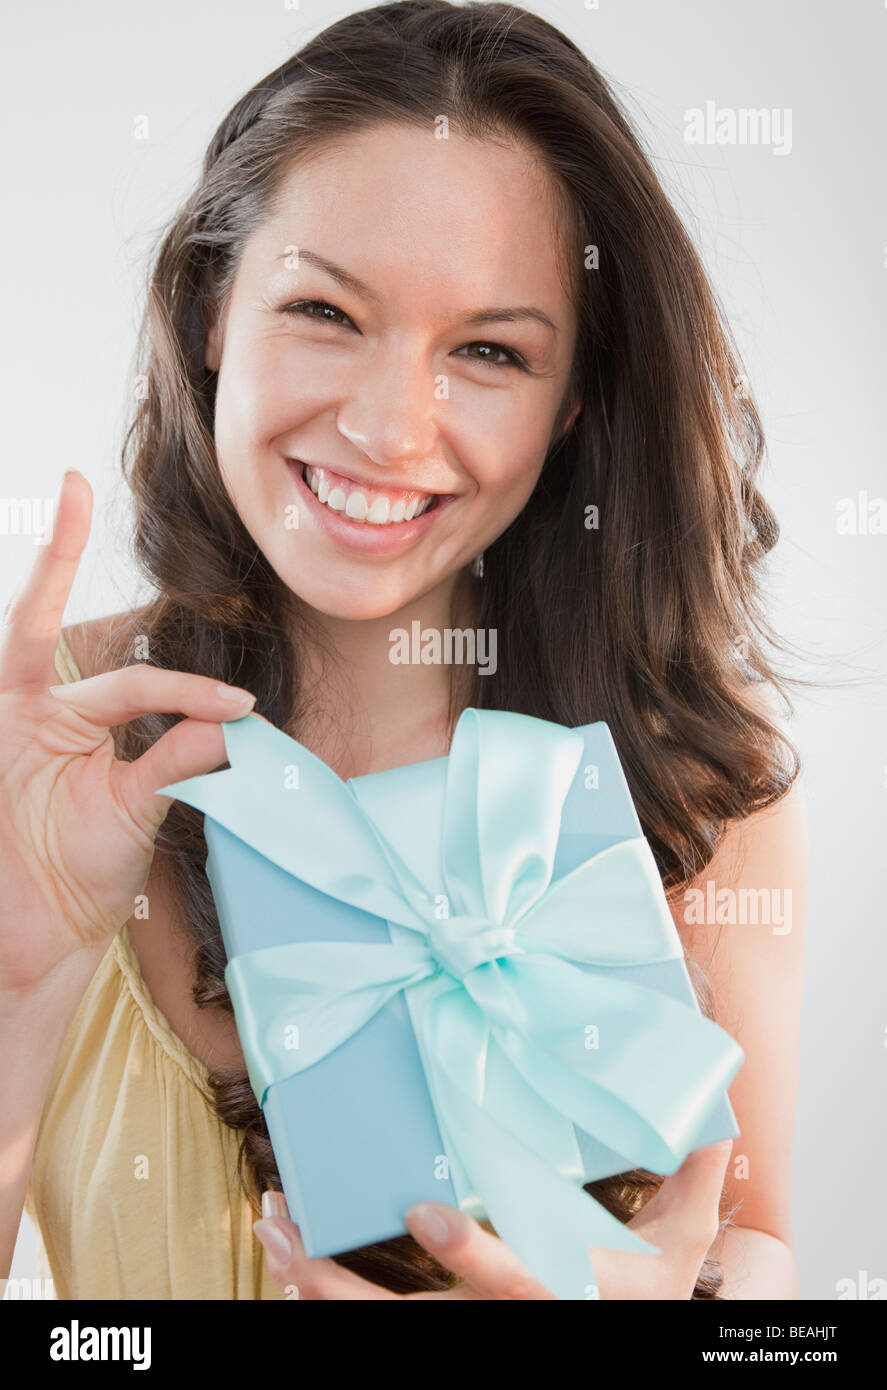 Mixed Race woman holding gift Banque D'Images